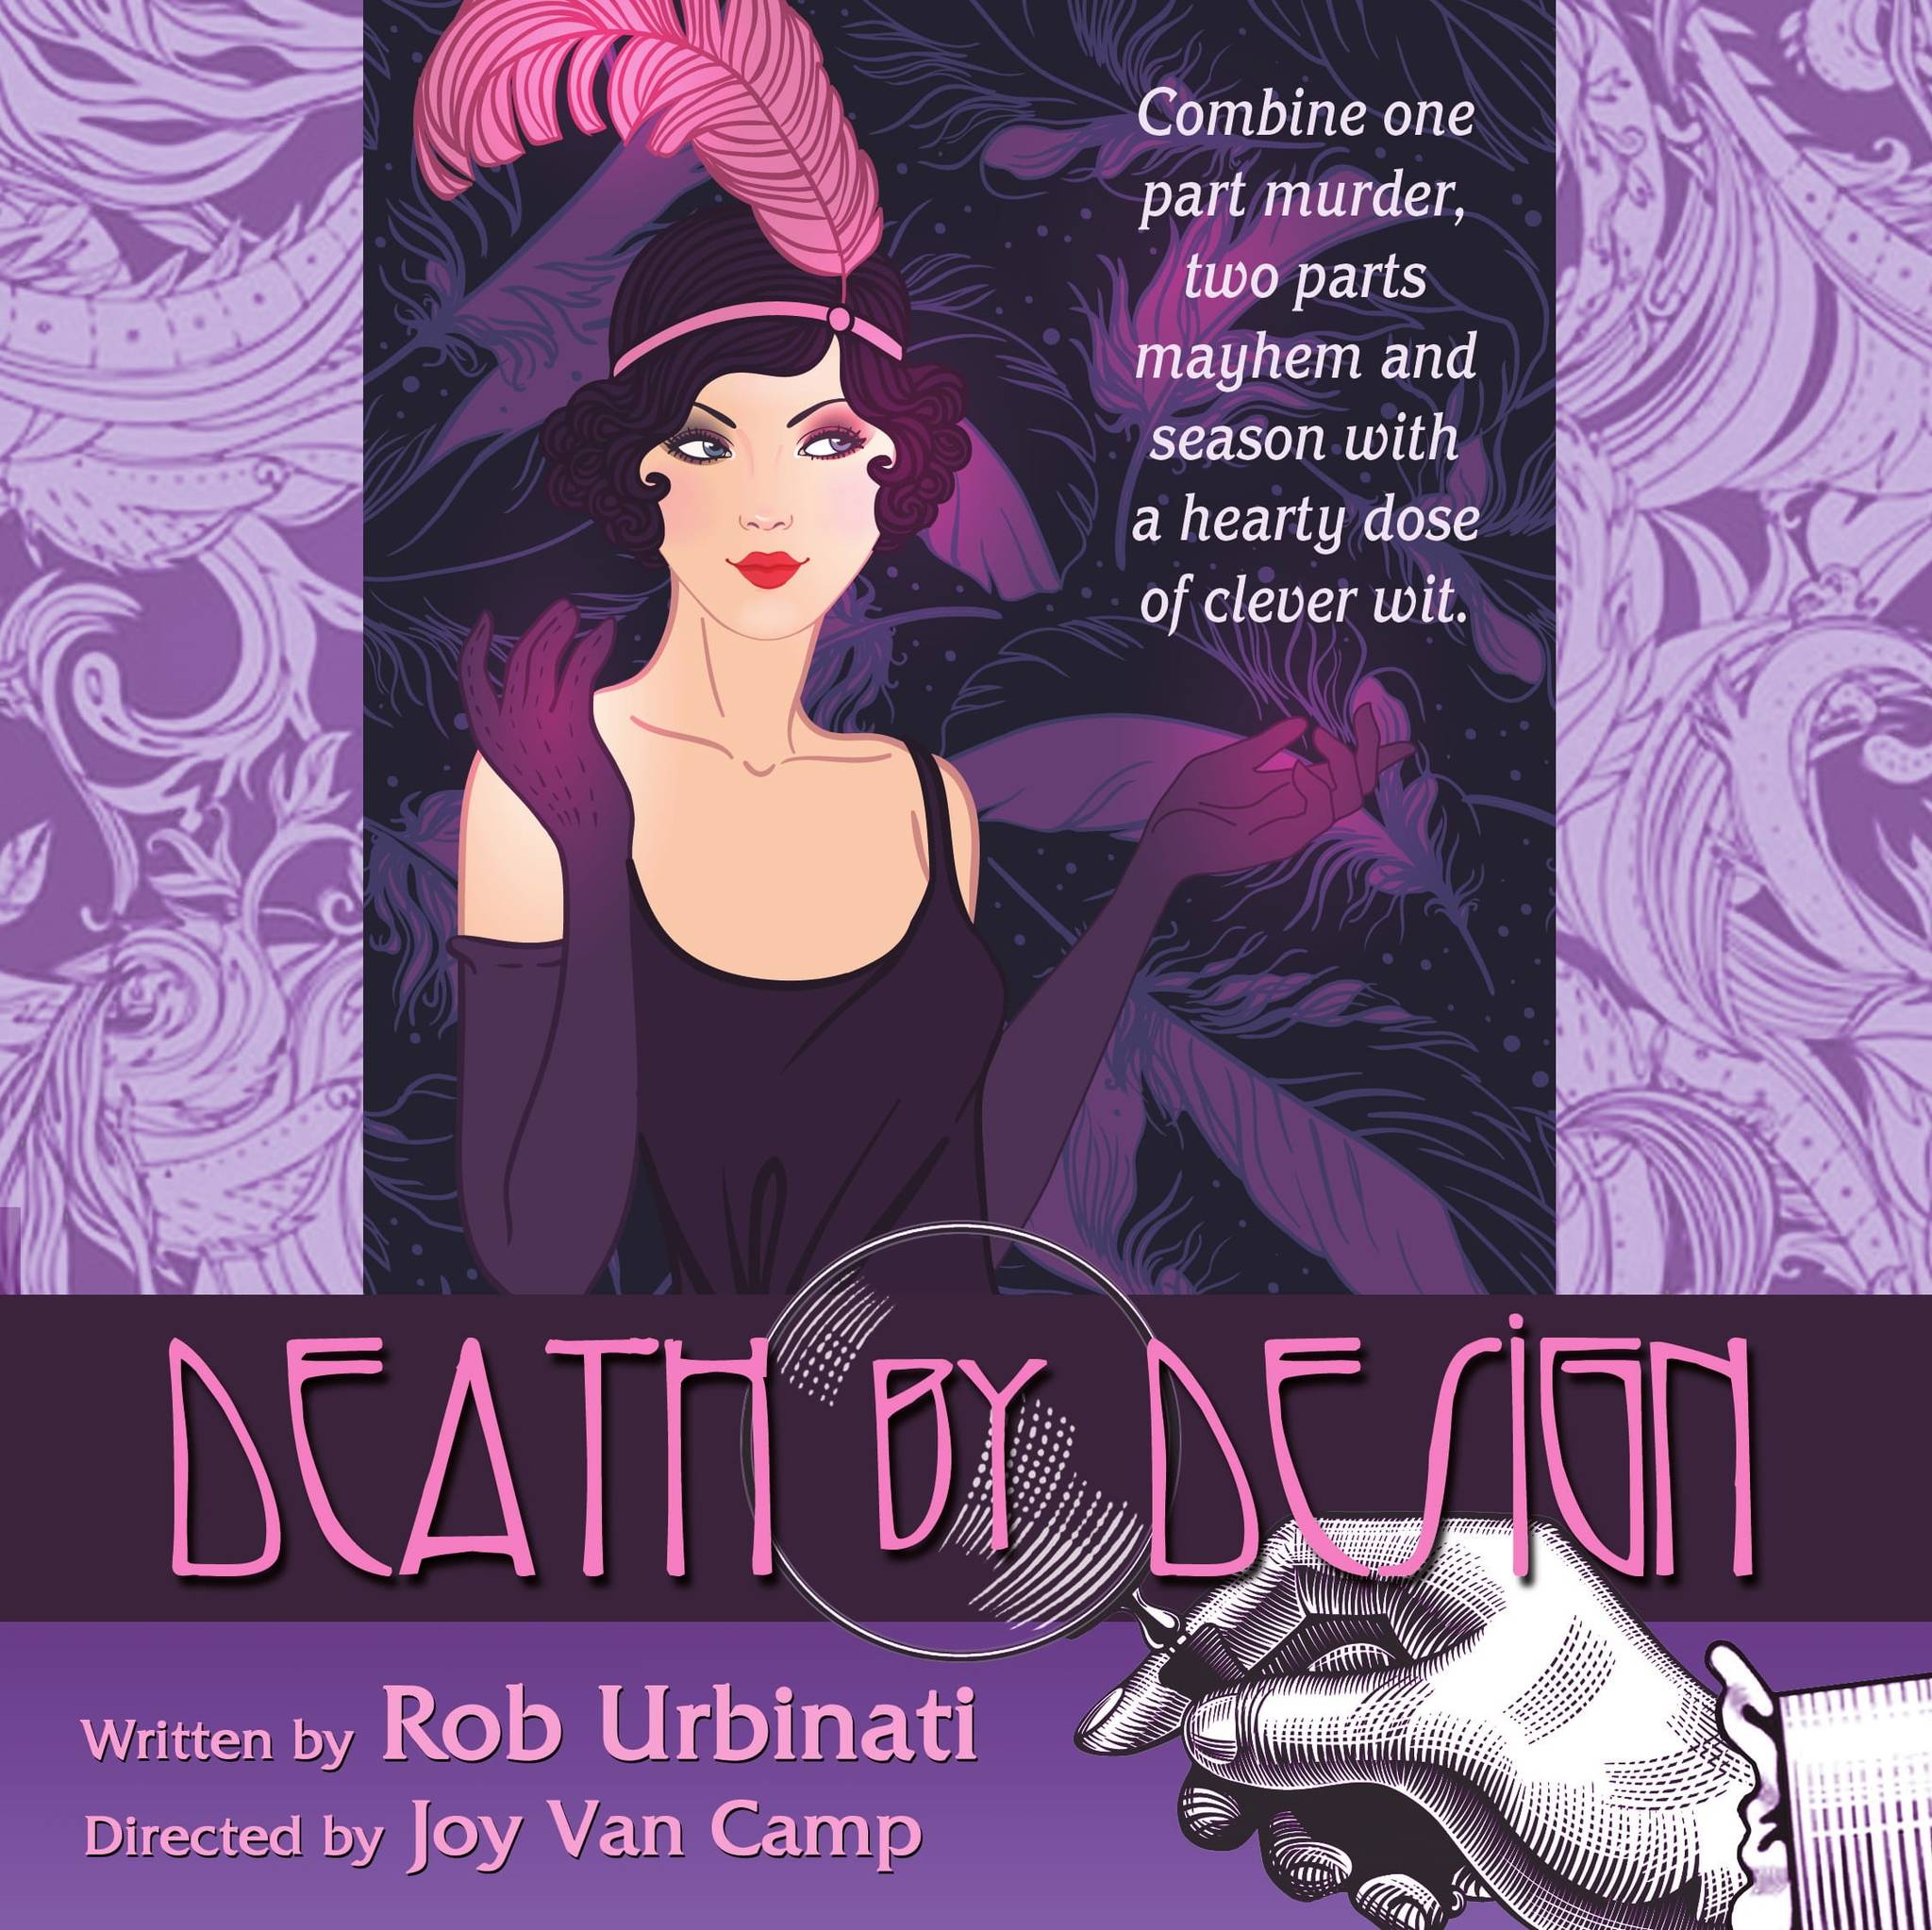 Death by Design set to open Feb. 15